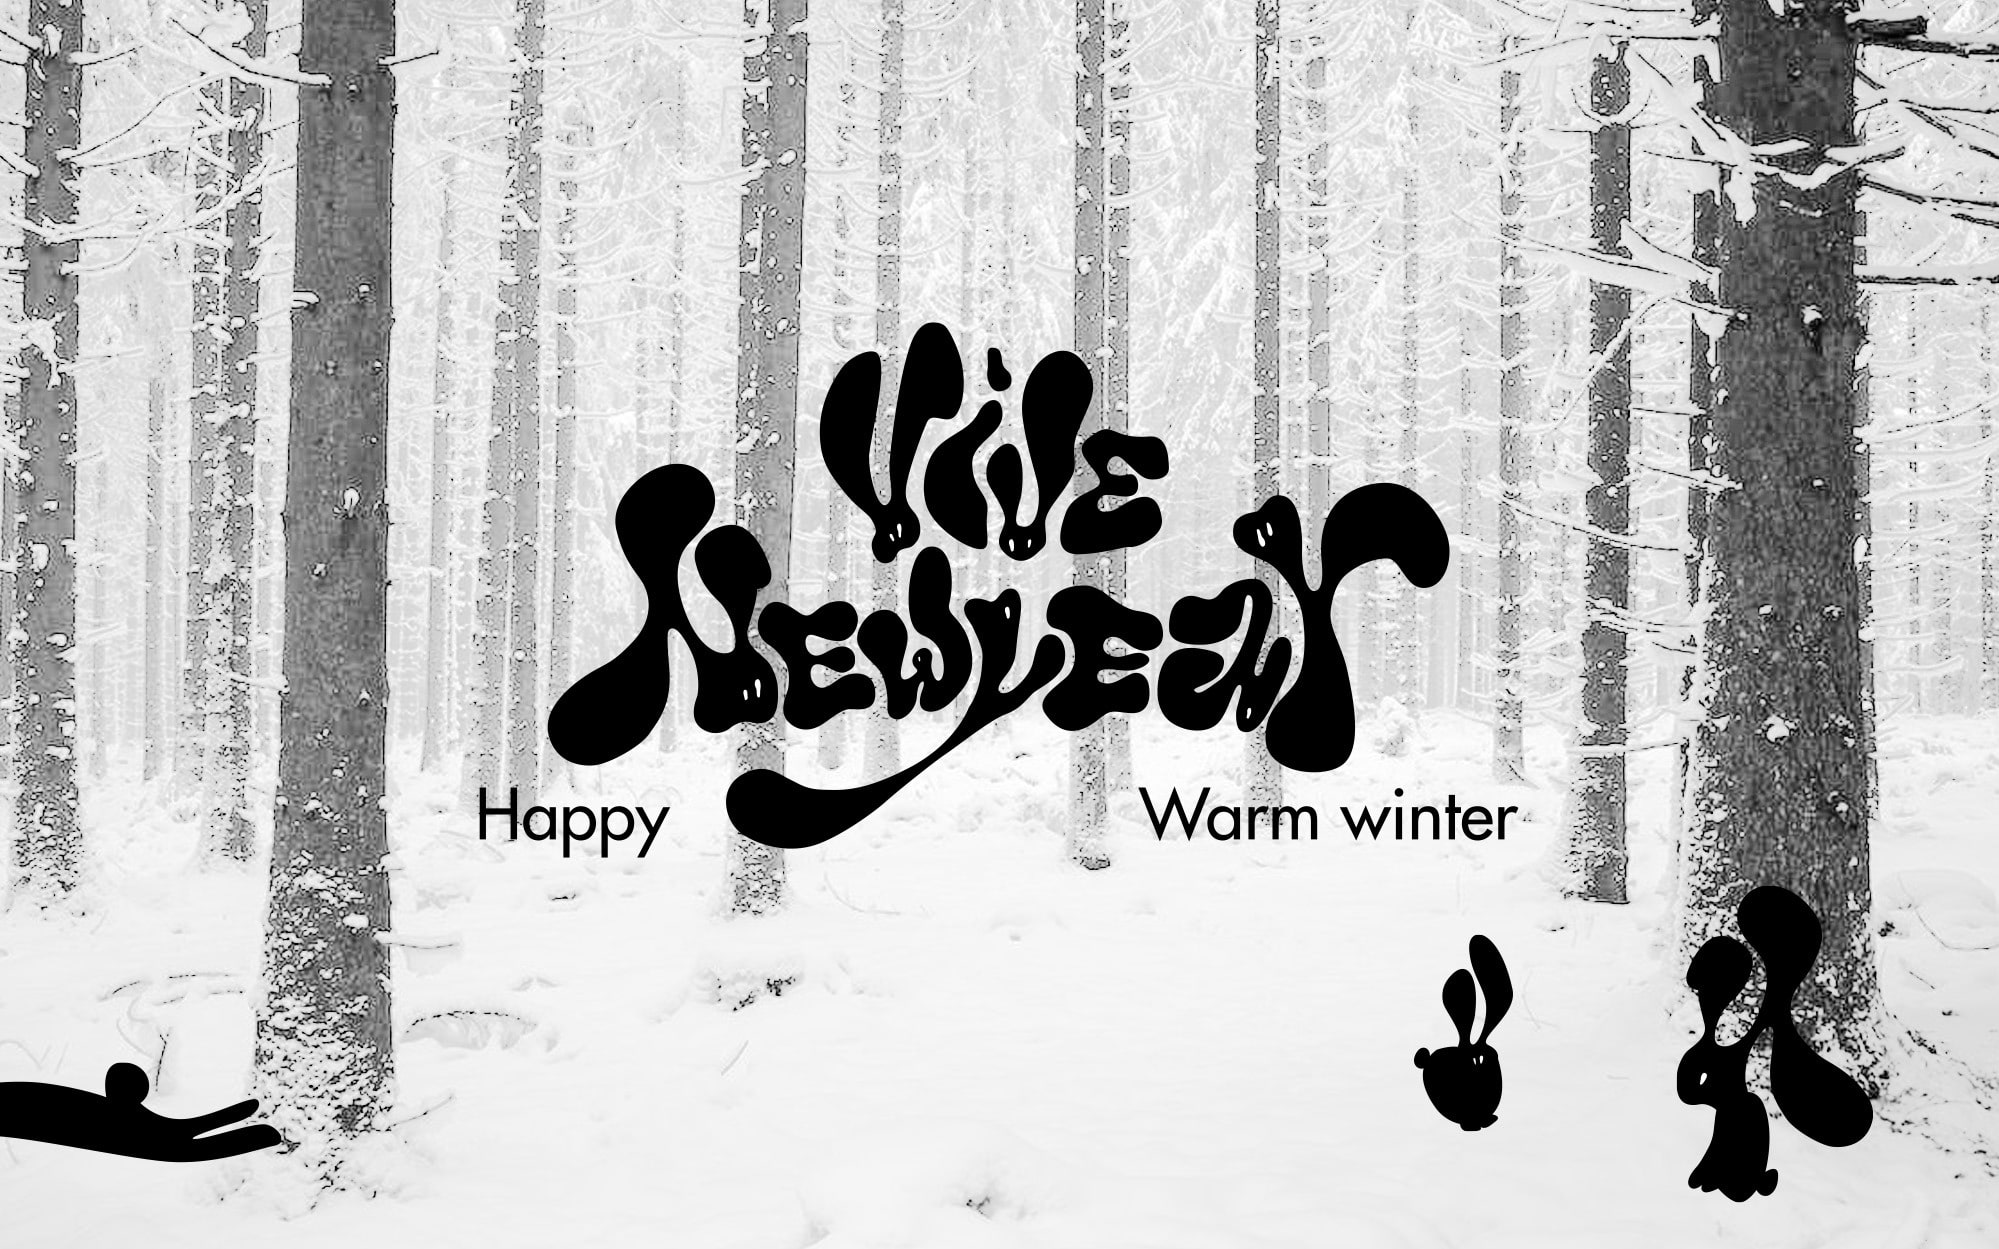 [Closed] VIVE NEW YEAR🖤  HAPPY WARM WINTER!